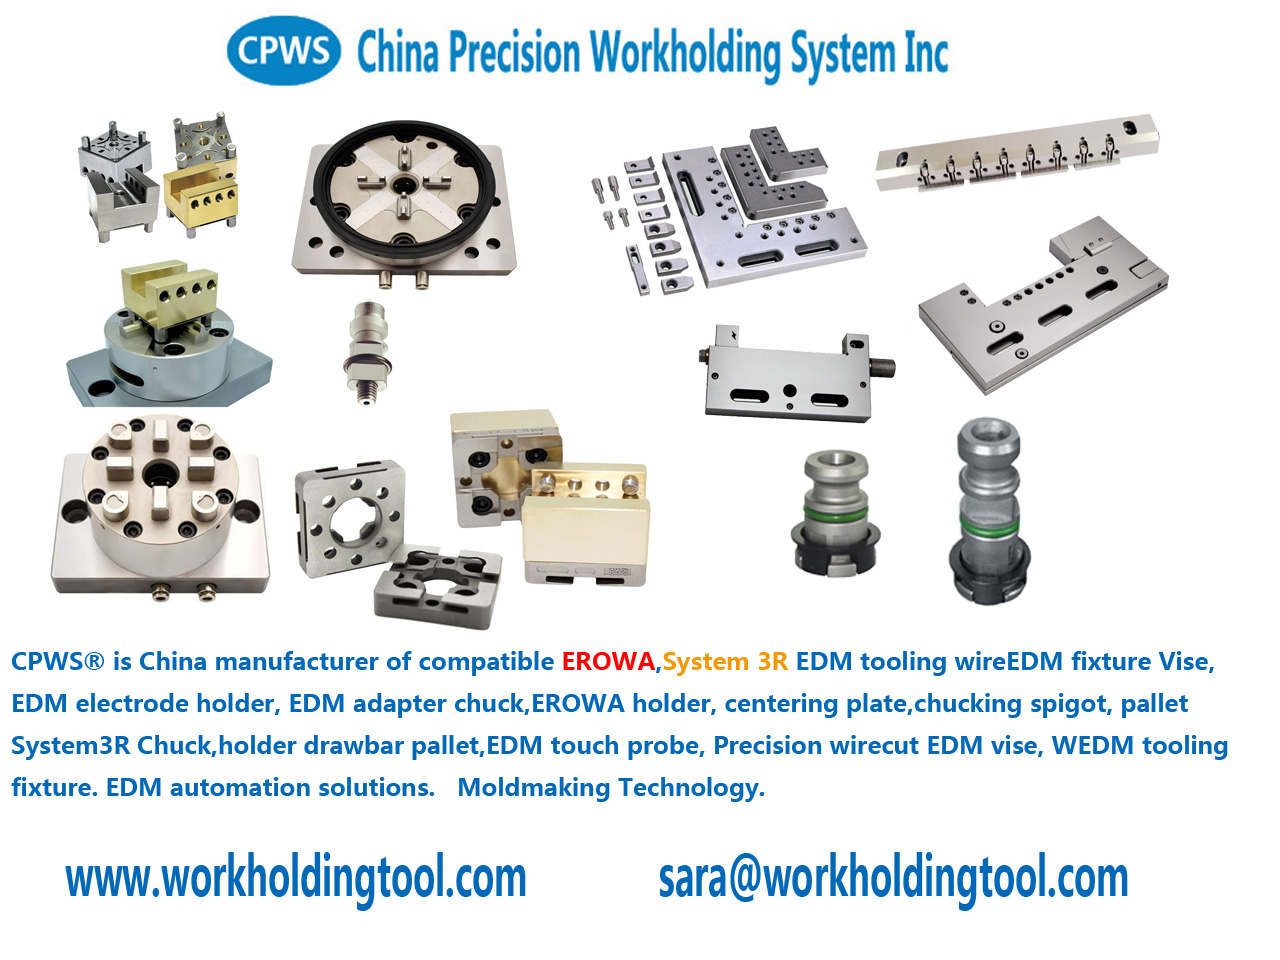 CPWS workholding